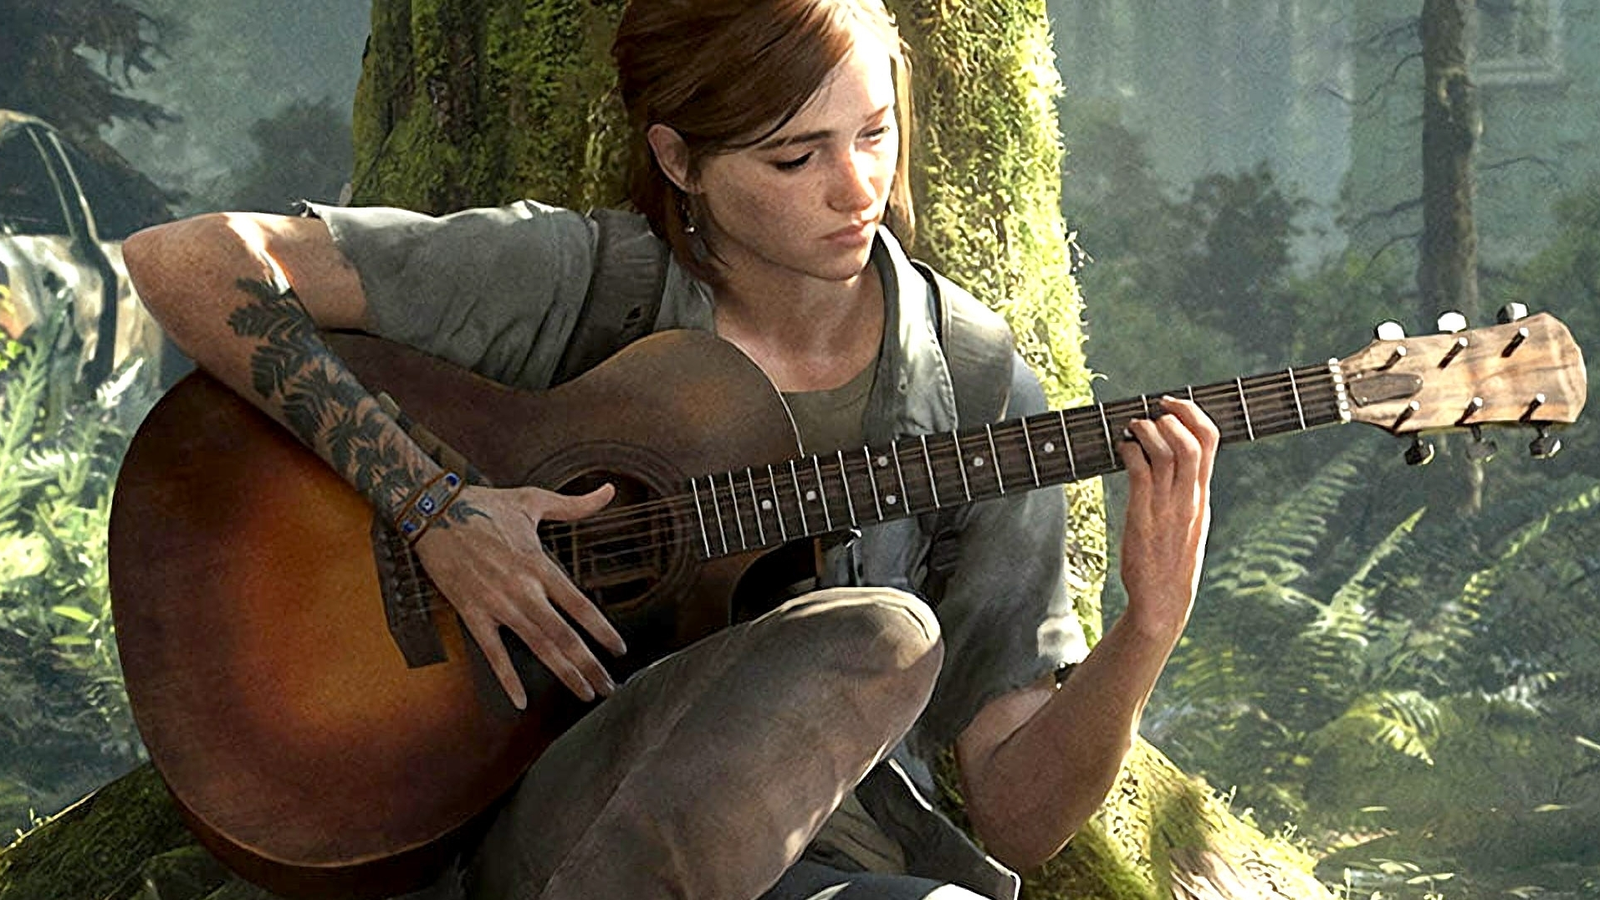 Can't Find a Multiplayer Match in The Last of Us on PS4? This Patch Should  Help